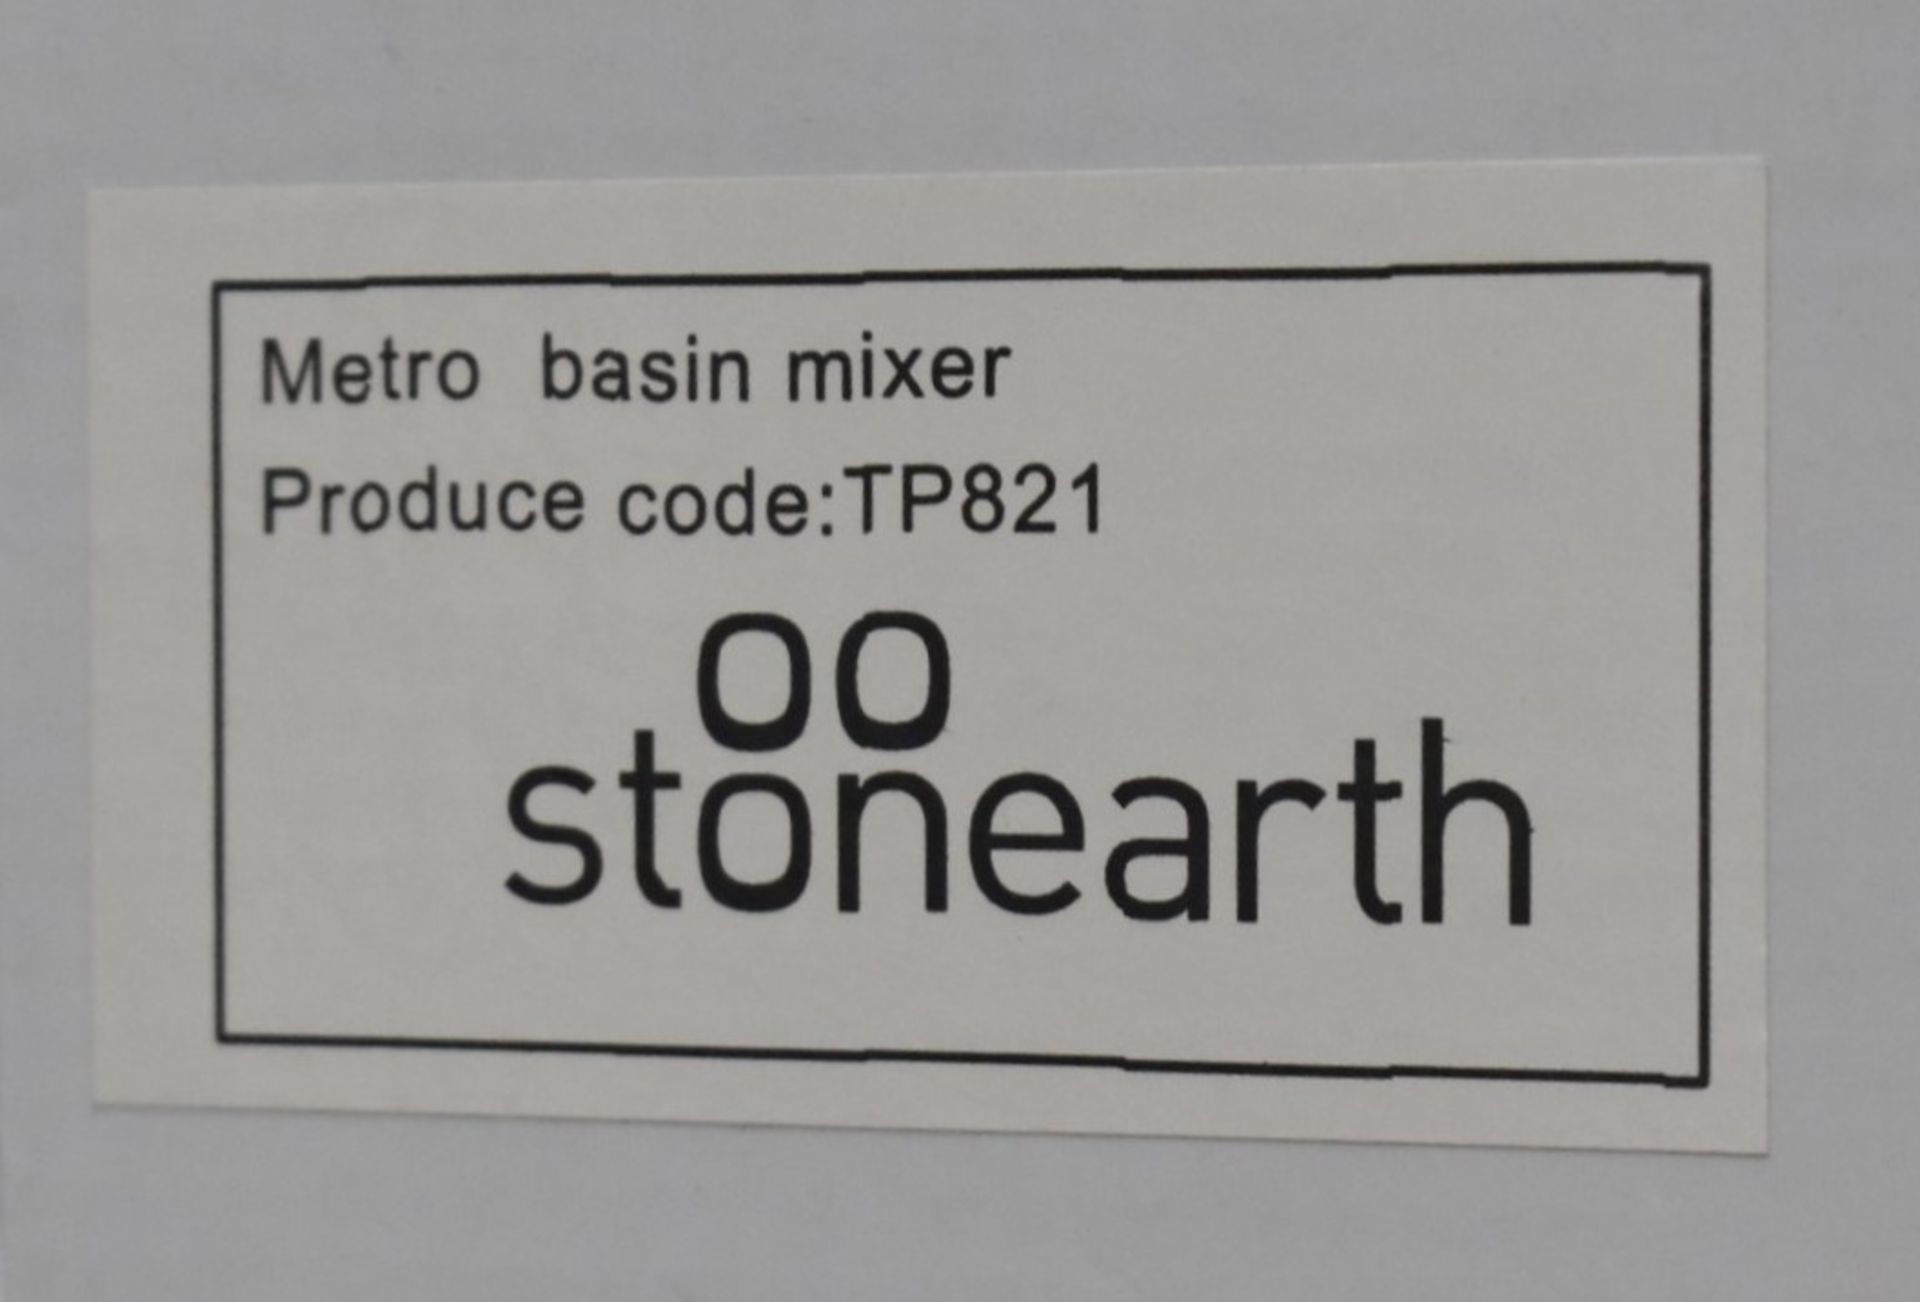 1 x Stonearth 'Metro' Stainless Steel Basin Mixer Tap - Brand New & Boxed - RRP £245 - Ref: TP821 - Image 6 of 13